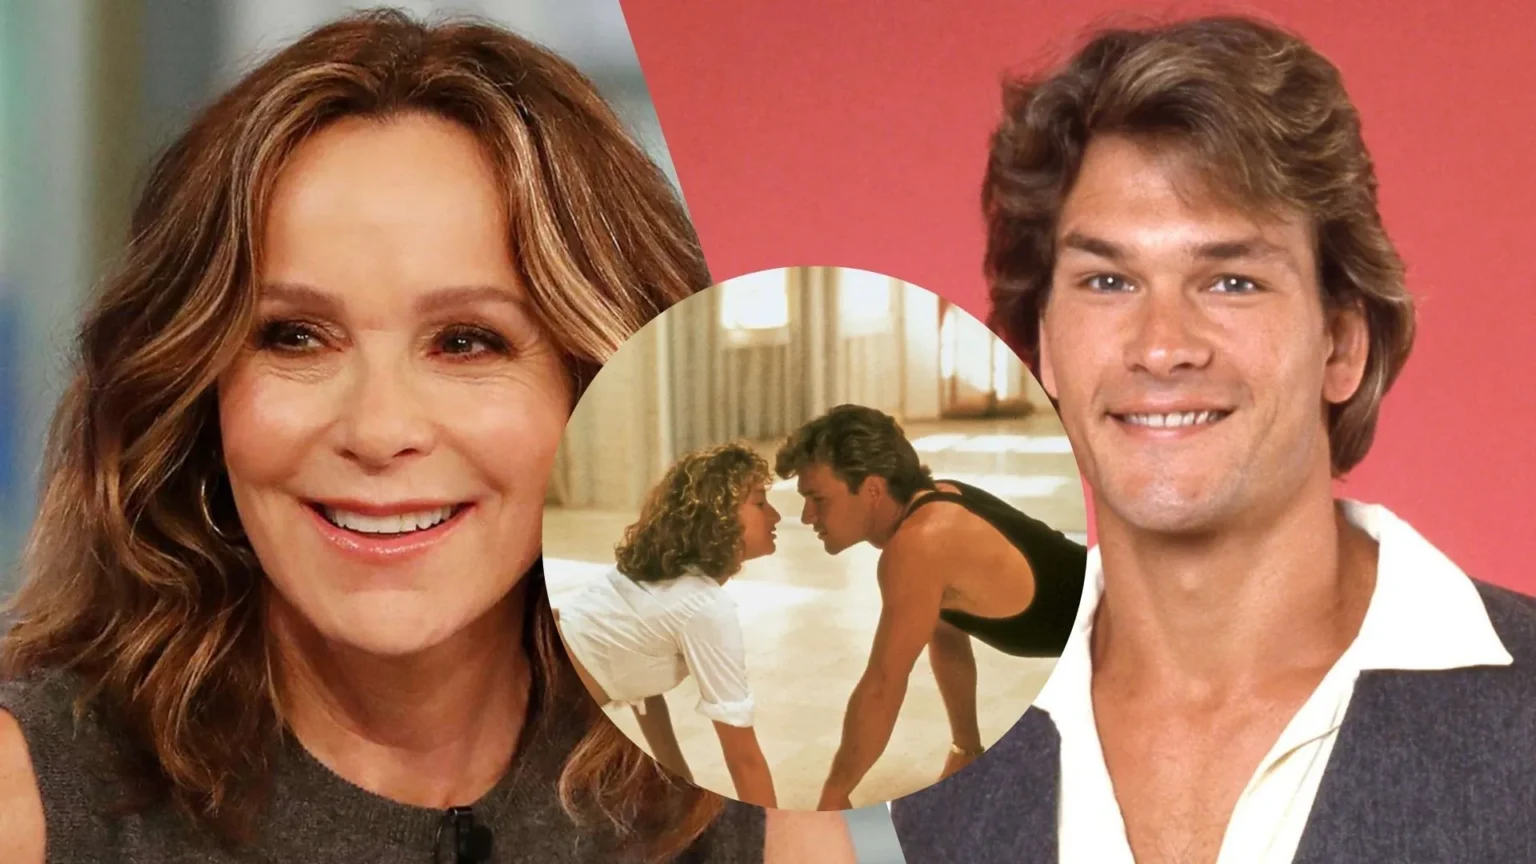 The Truth Behind the 'Dirty Dancing' Romance Jennifer Grey and Patrick Swayze's Rocky Relationship